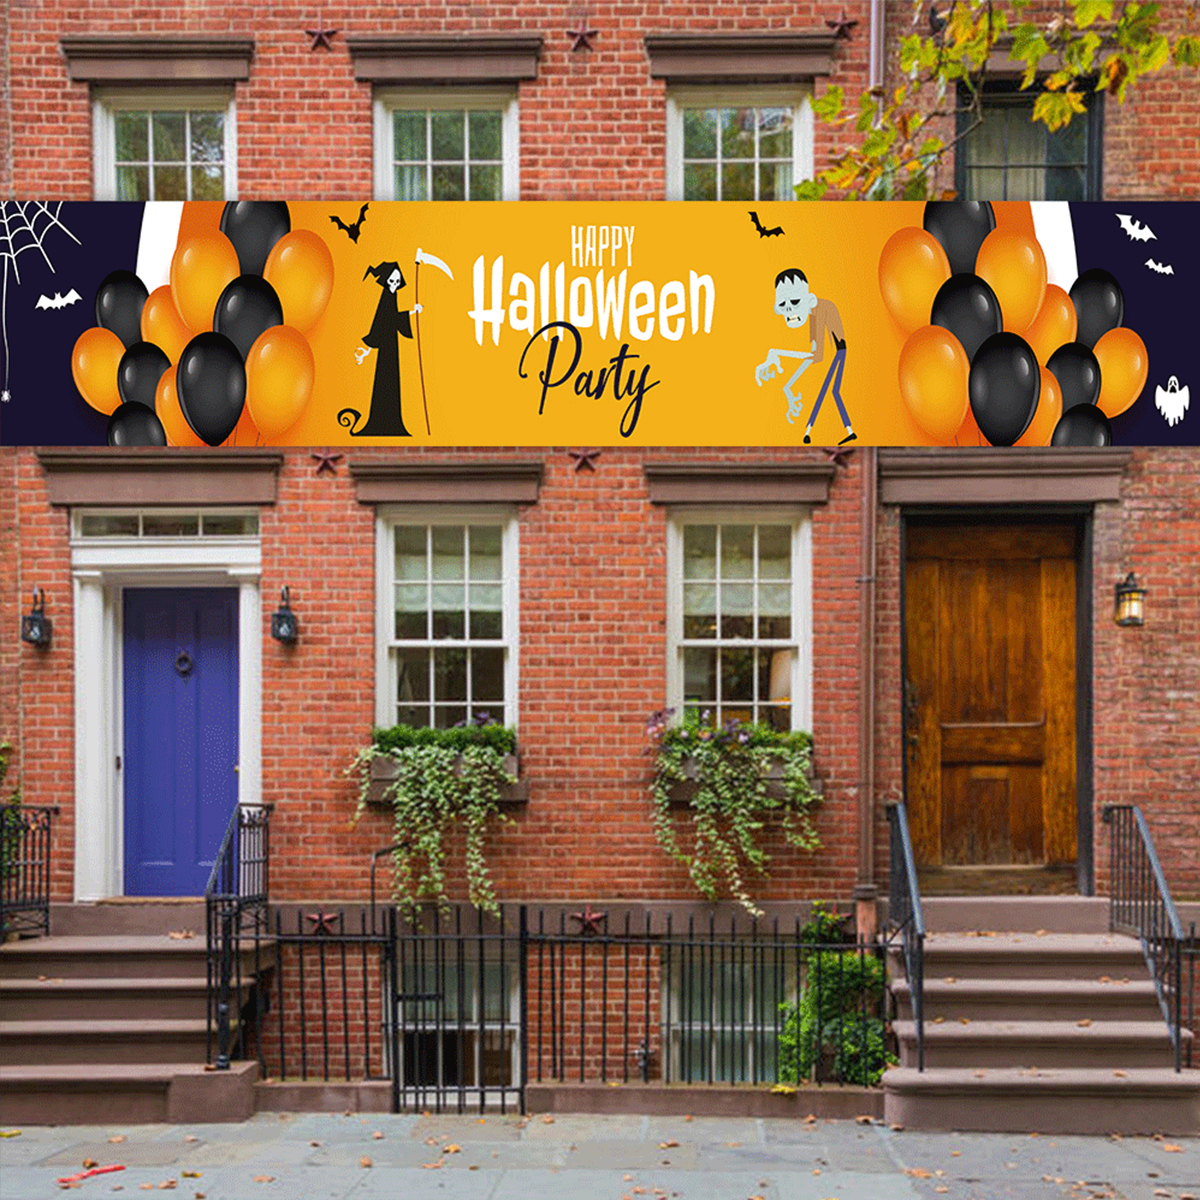 Halloween-Decoration-Banner-Photography-Backdrop-Photo-Background-House-Apartment-Halloween-Party-De-1707127-2